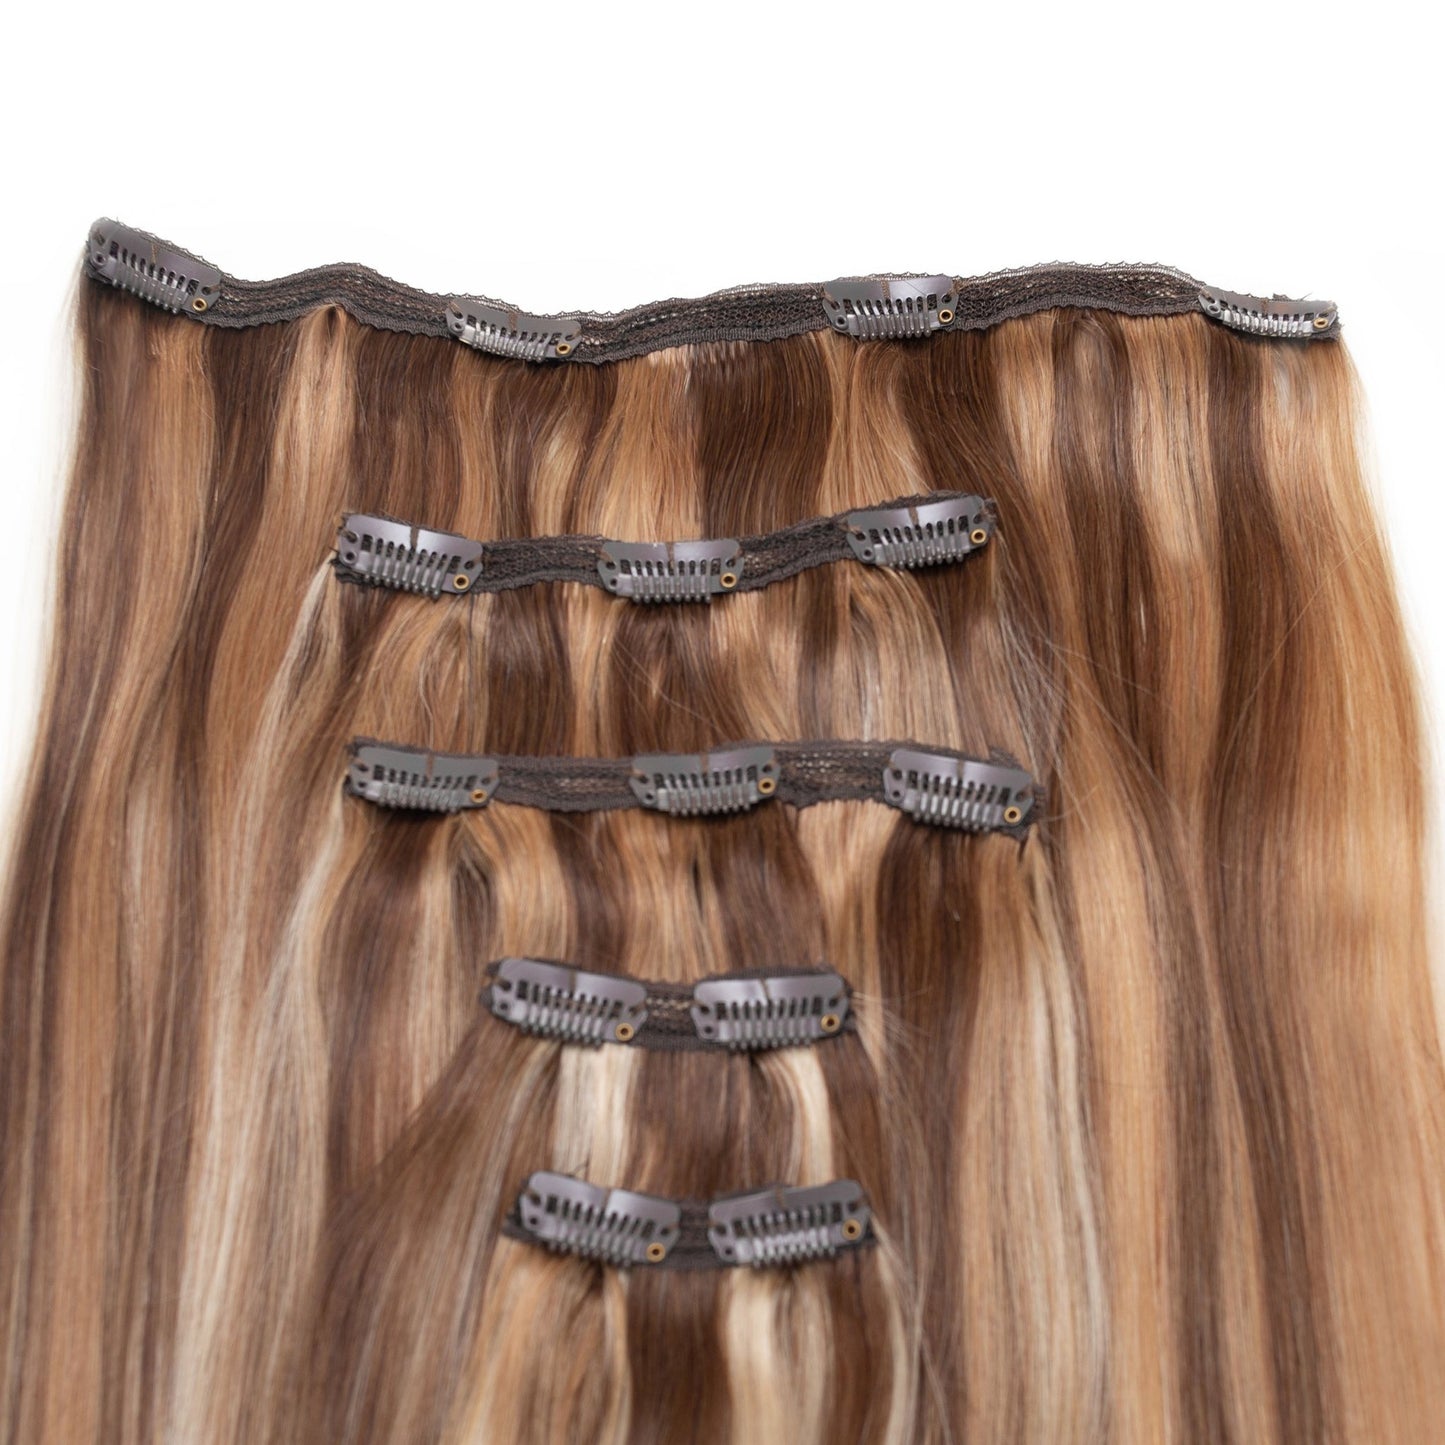 Seamless1 Vanilla Human Hair in 5 Piece - shelley and co